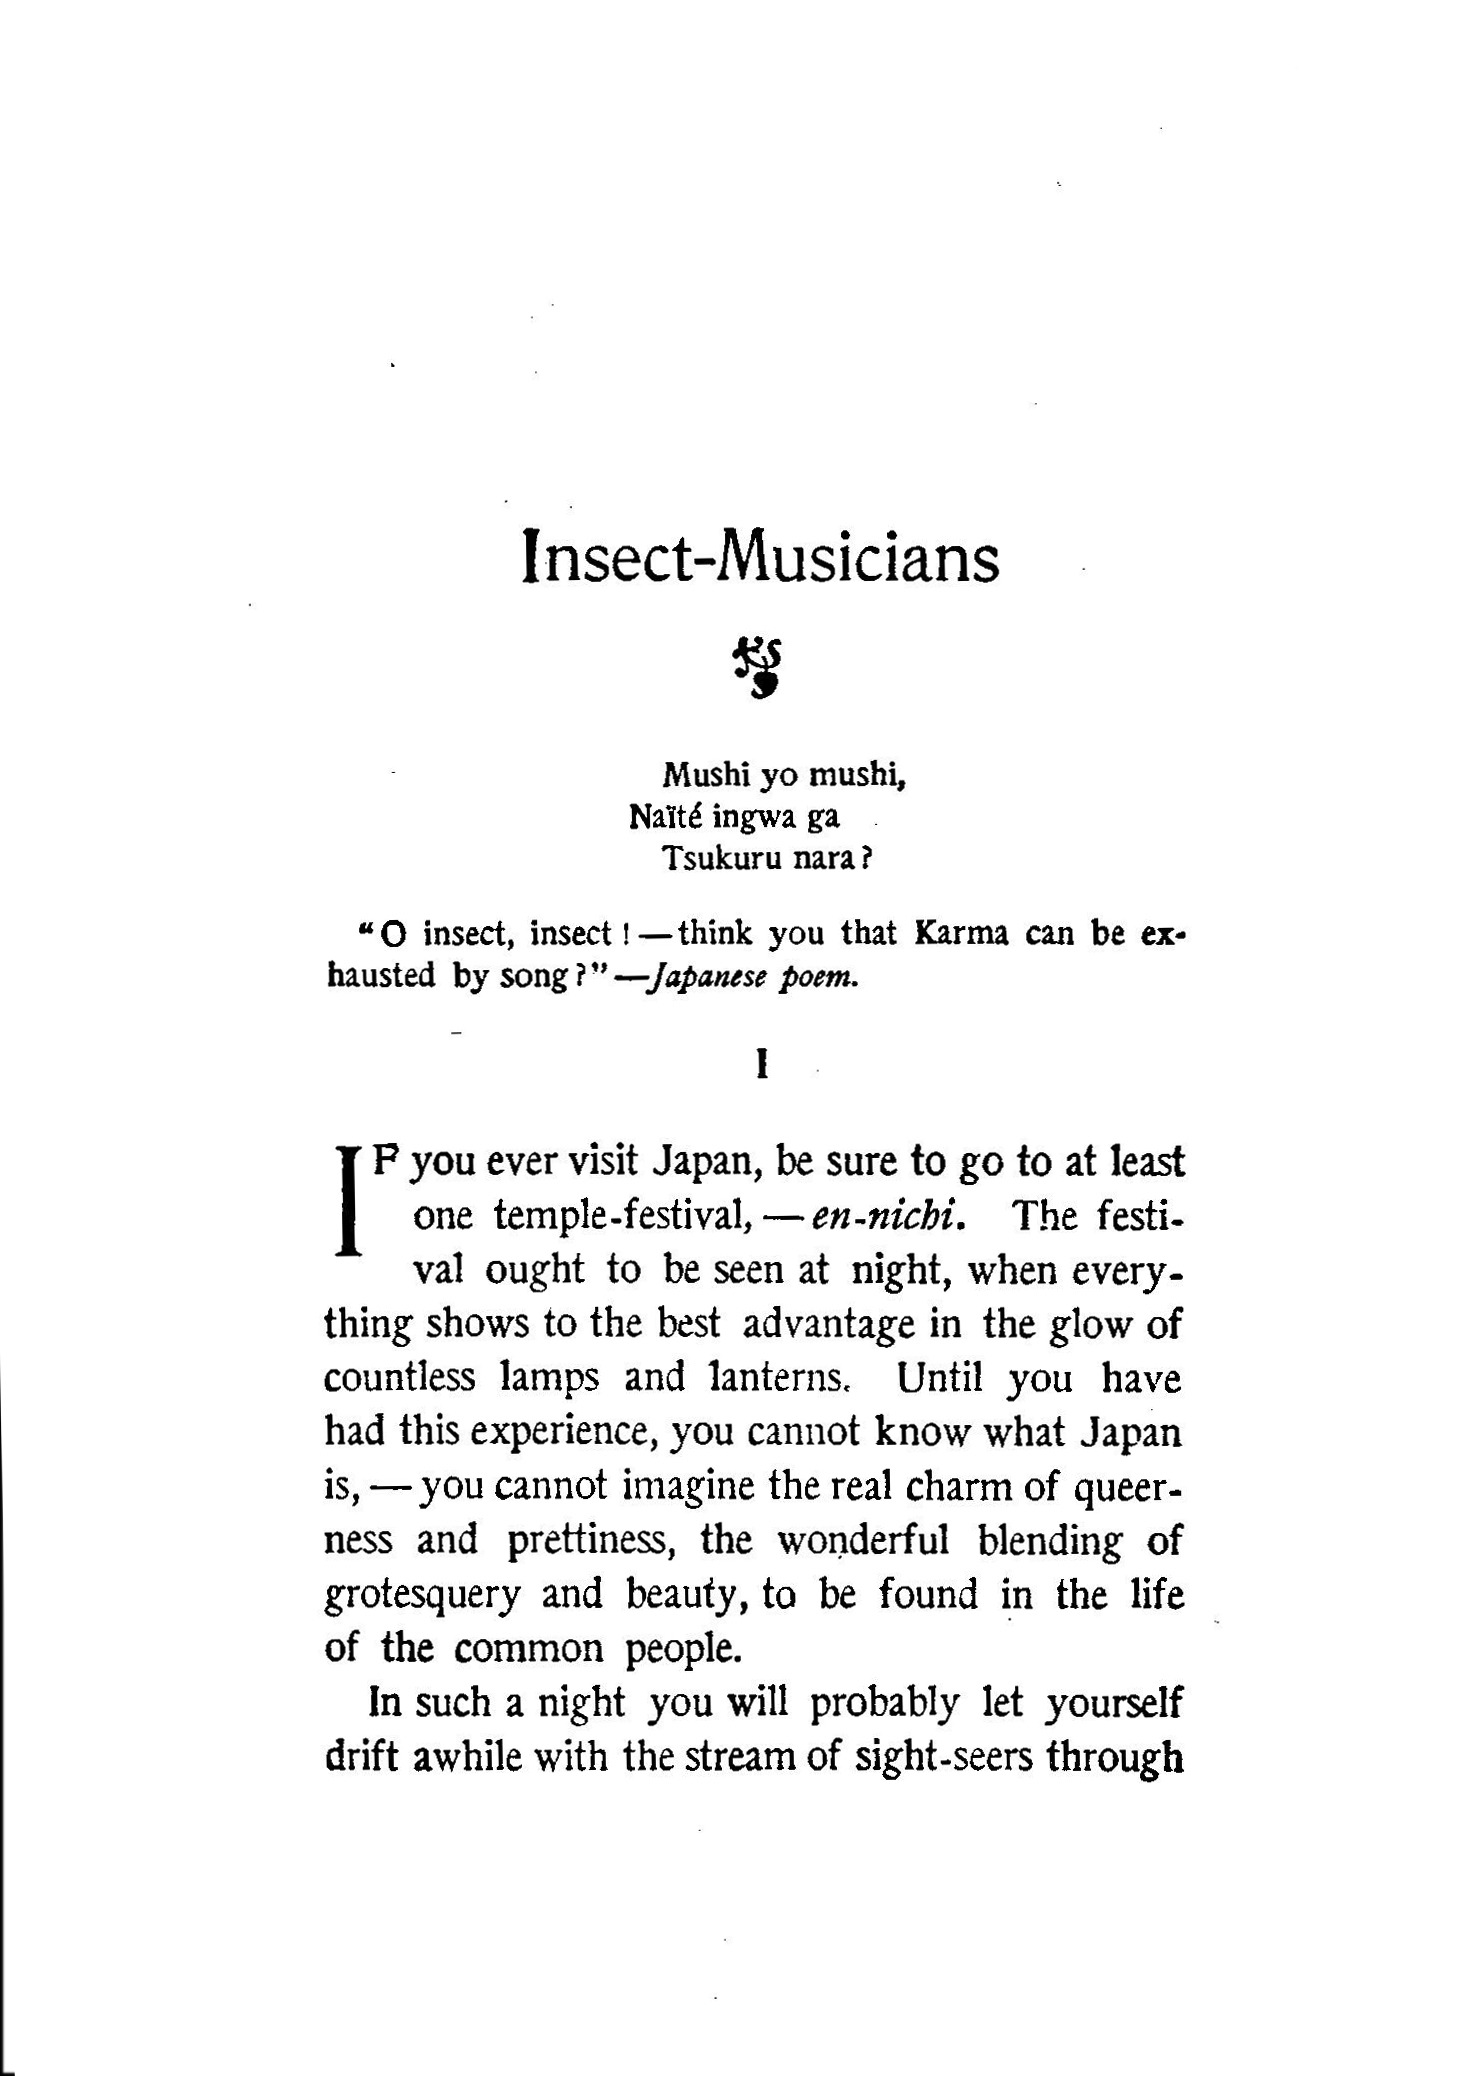 39_insect_musicians.jpg